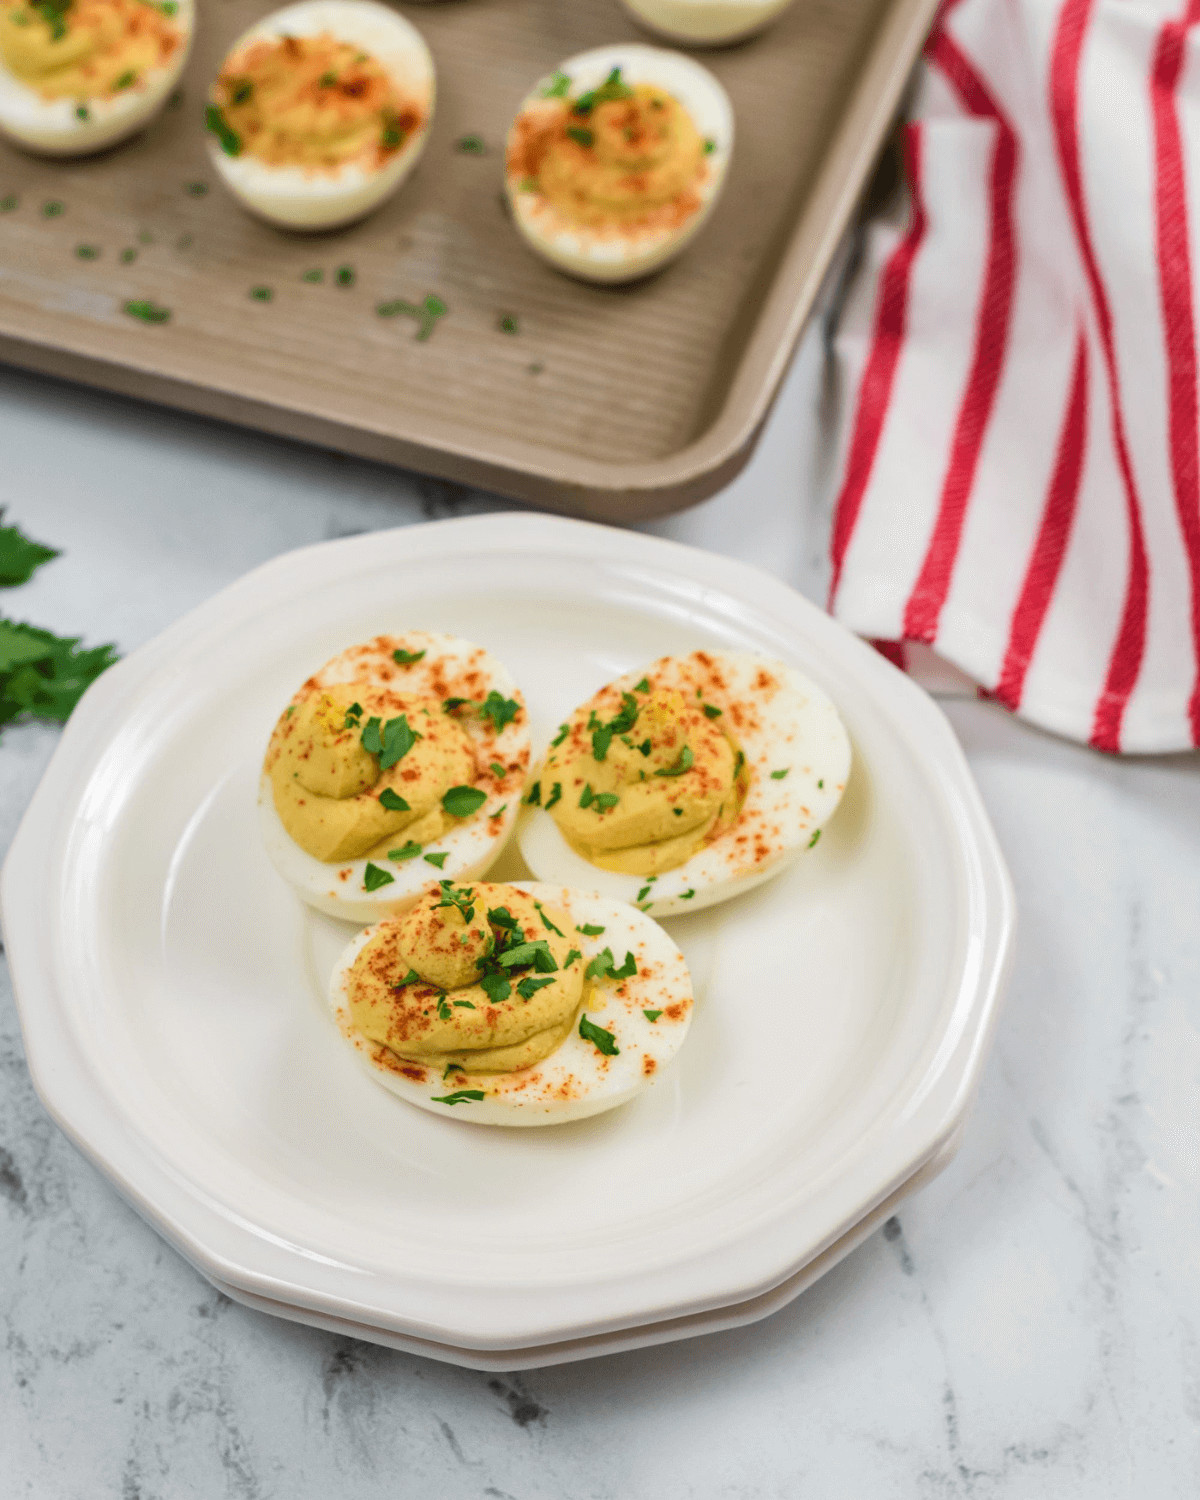 Plate of Million Dollar Deviled Eggs garnished with paprika and parsley, with additional eggs and a striped napkin in the background.